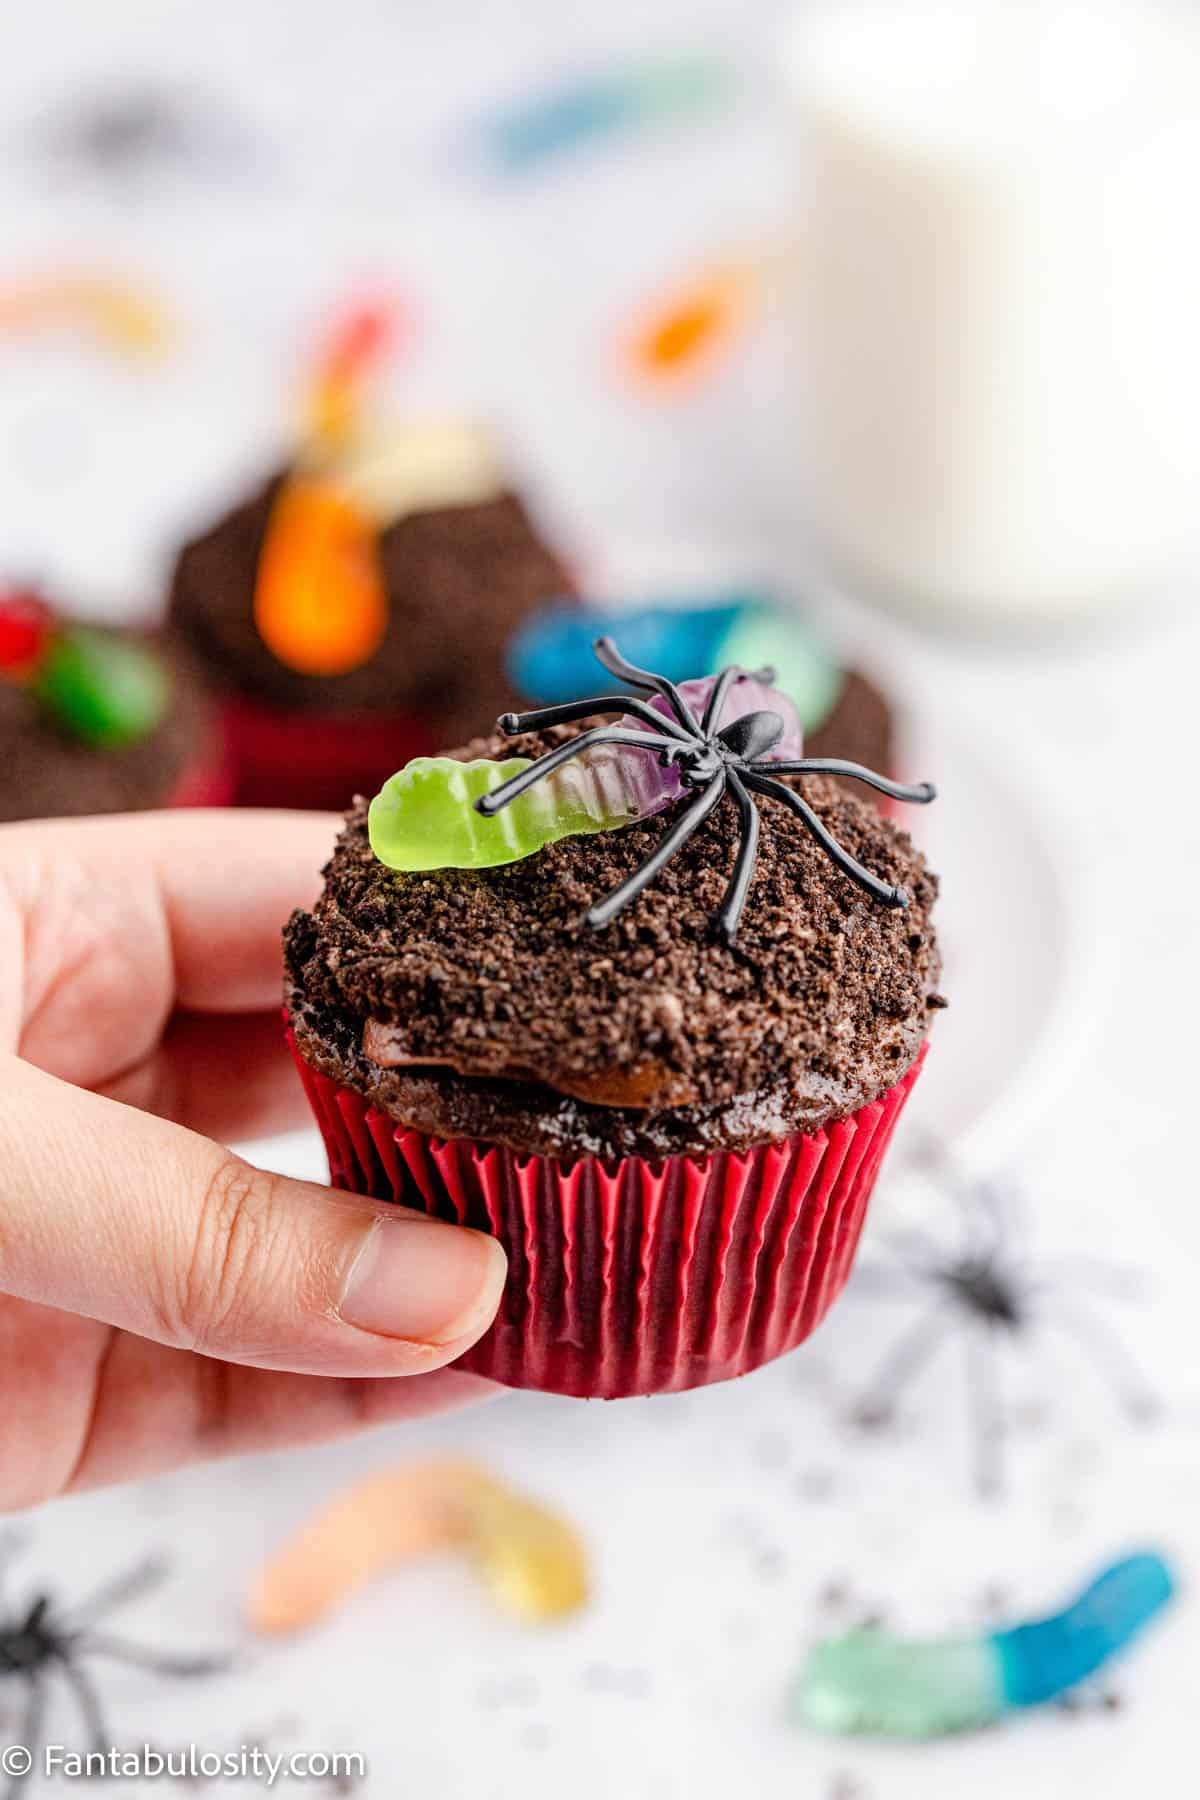 A hand is holding a chocolate frosted cupcake topped with Oreo crumbs and a colorful gummy worm